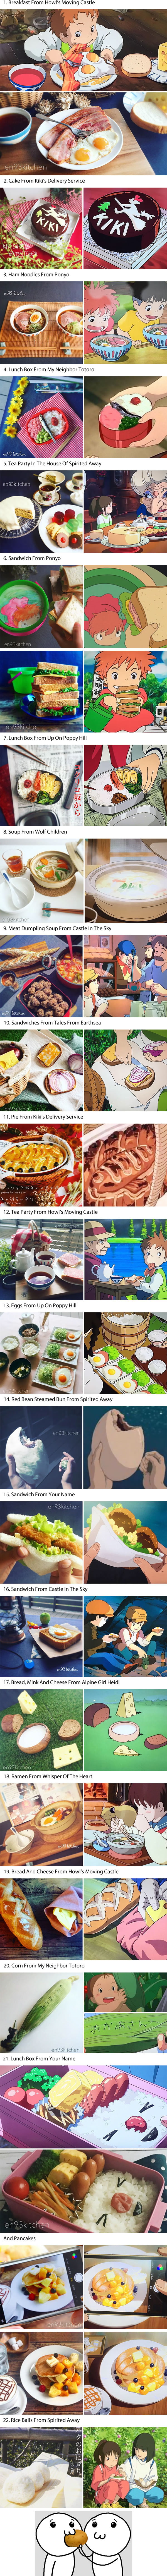 Japanese Woman Recreates The Delicious Food From Studio Ghibli Films